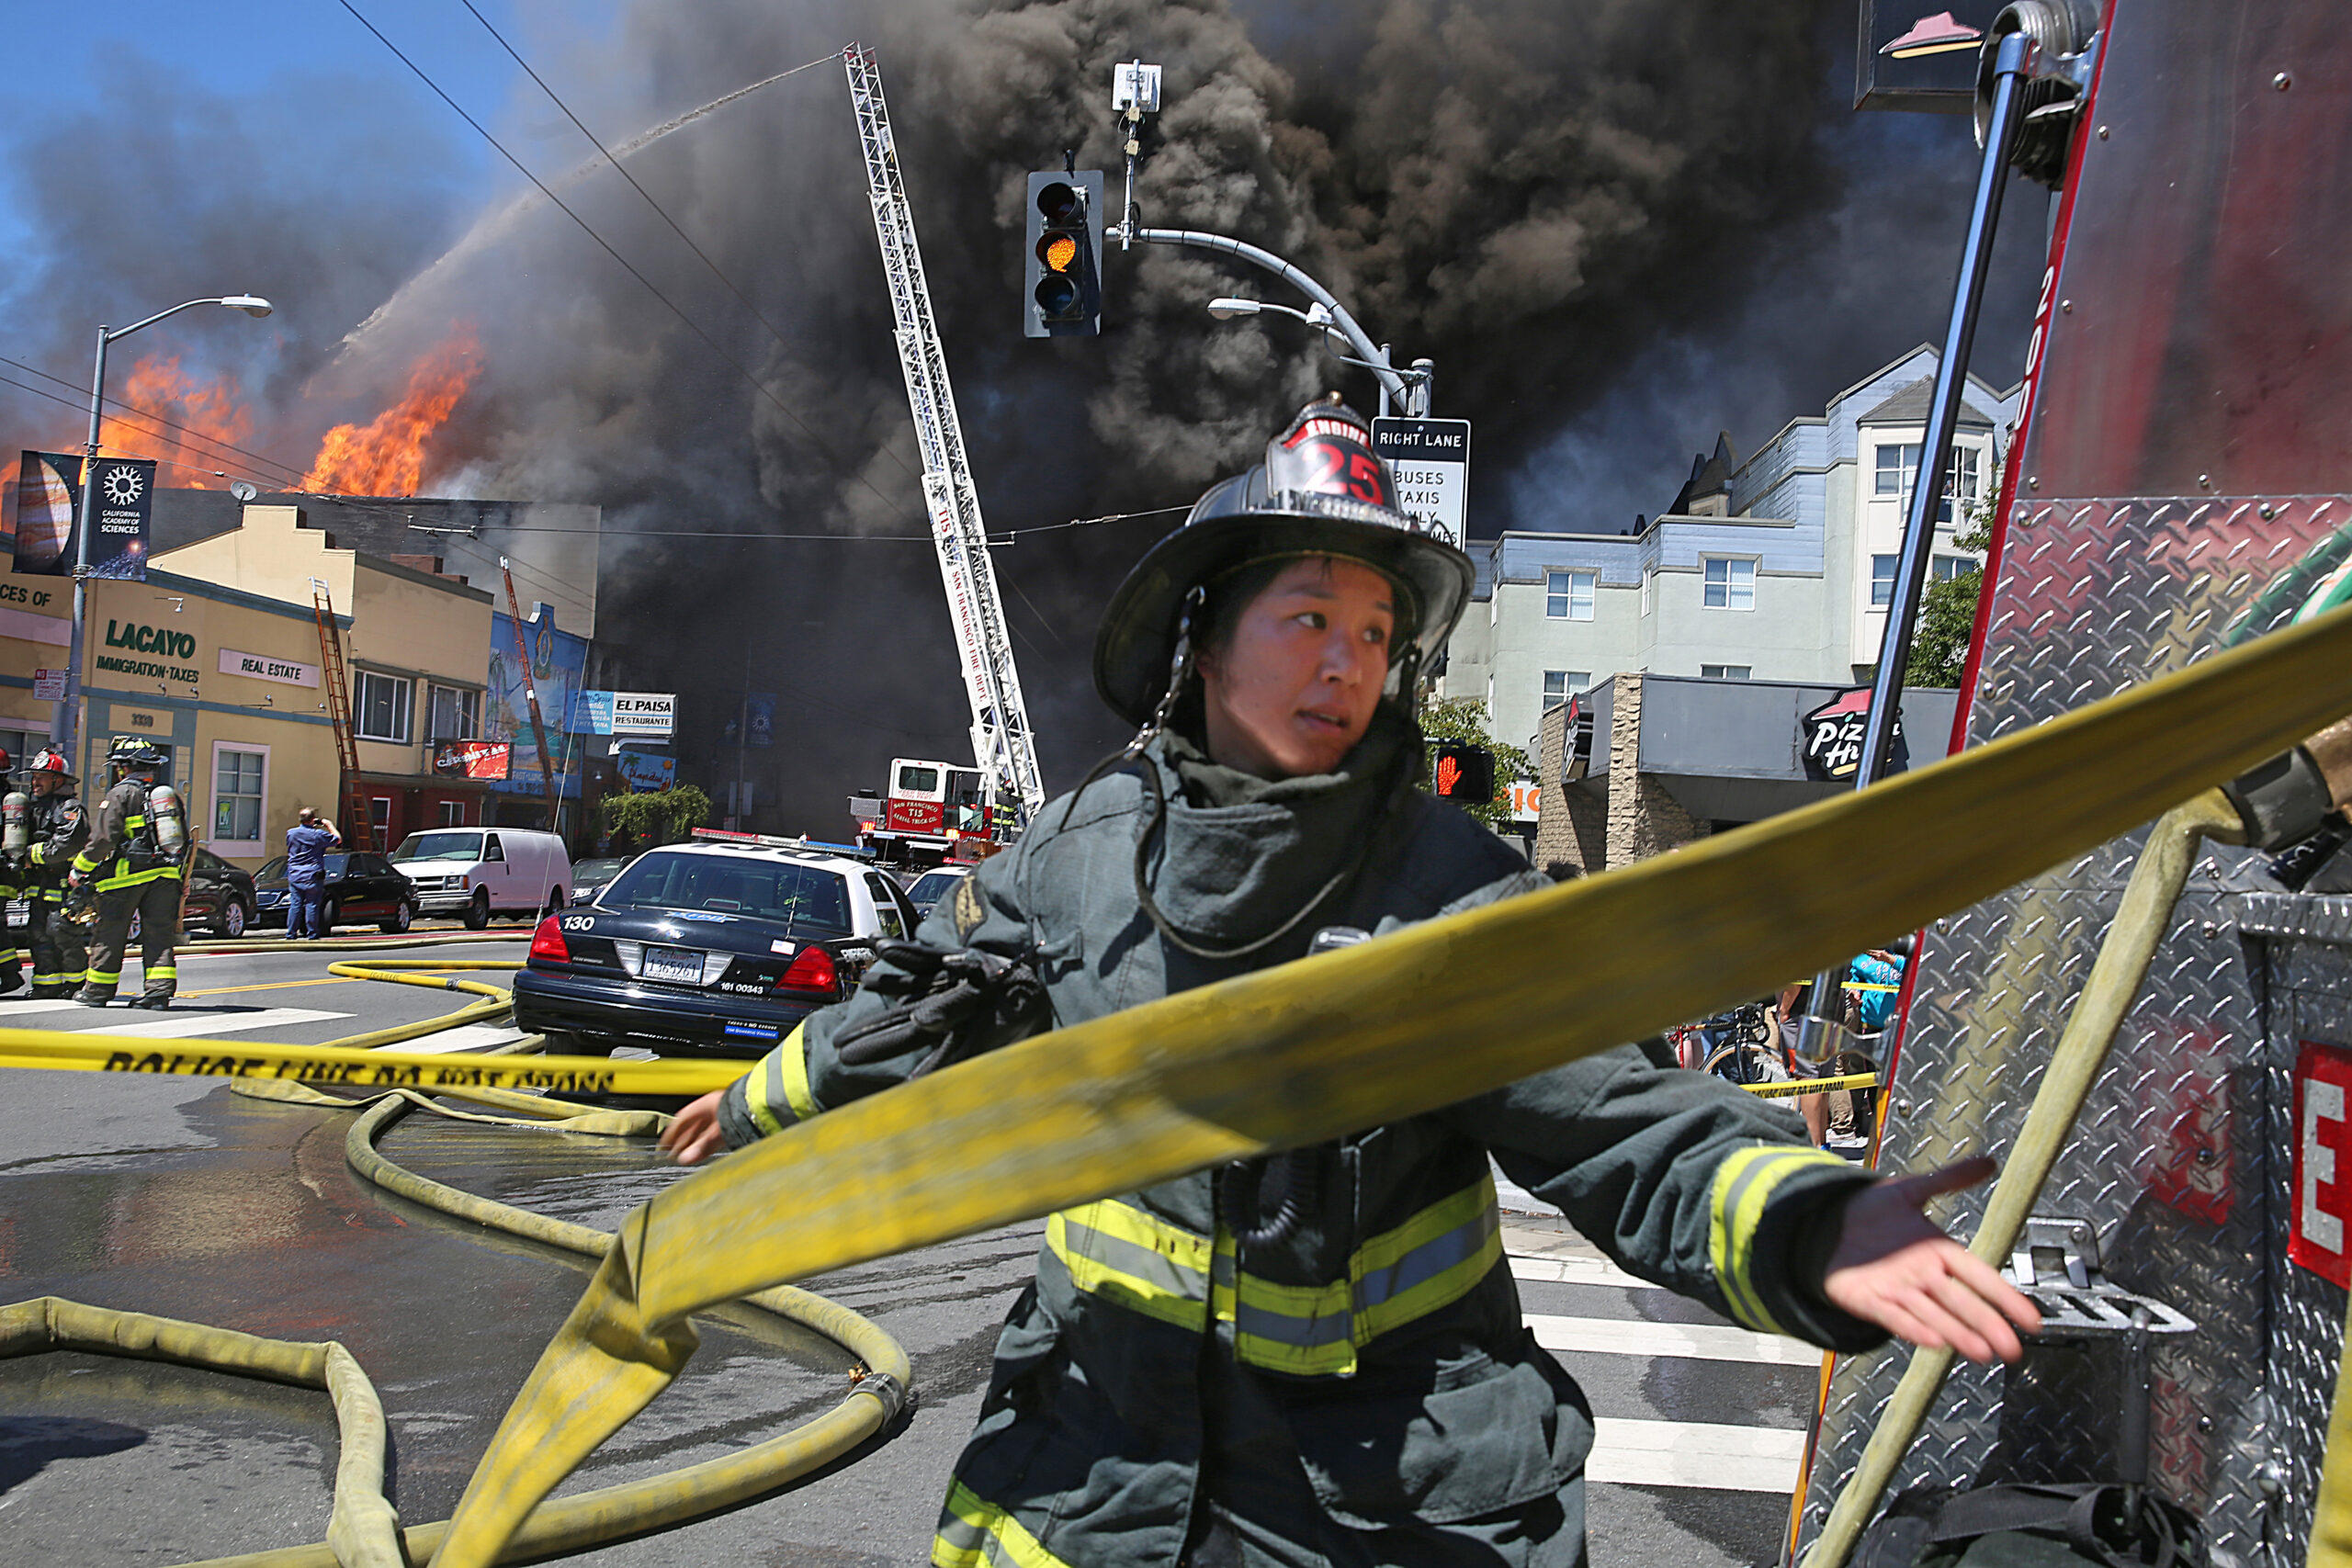 SF Firefighters Risk Cancer Every Day—Even Their Jackets Are a Threat